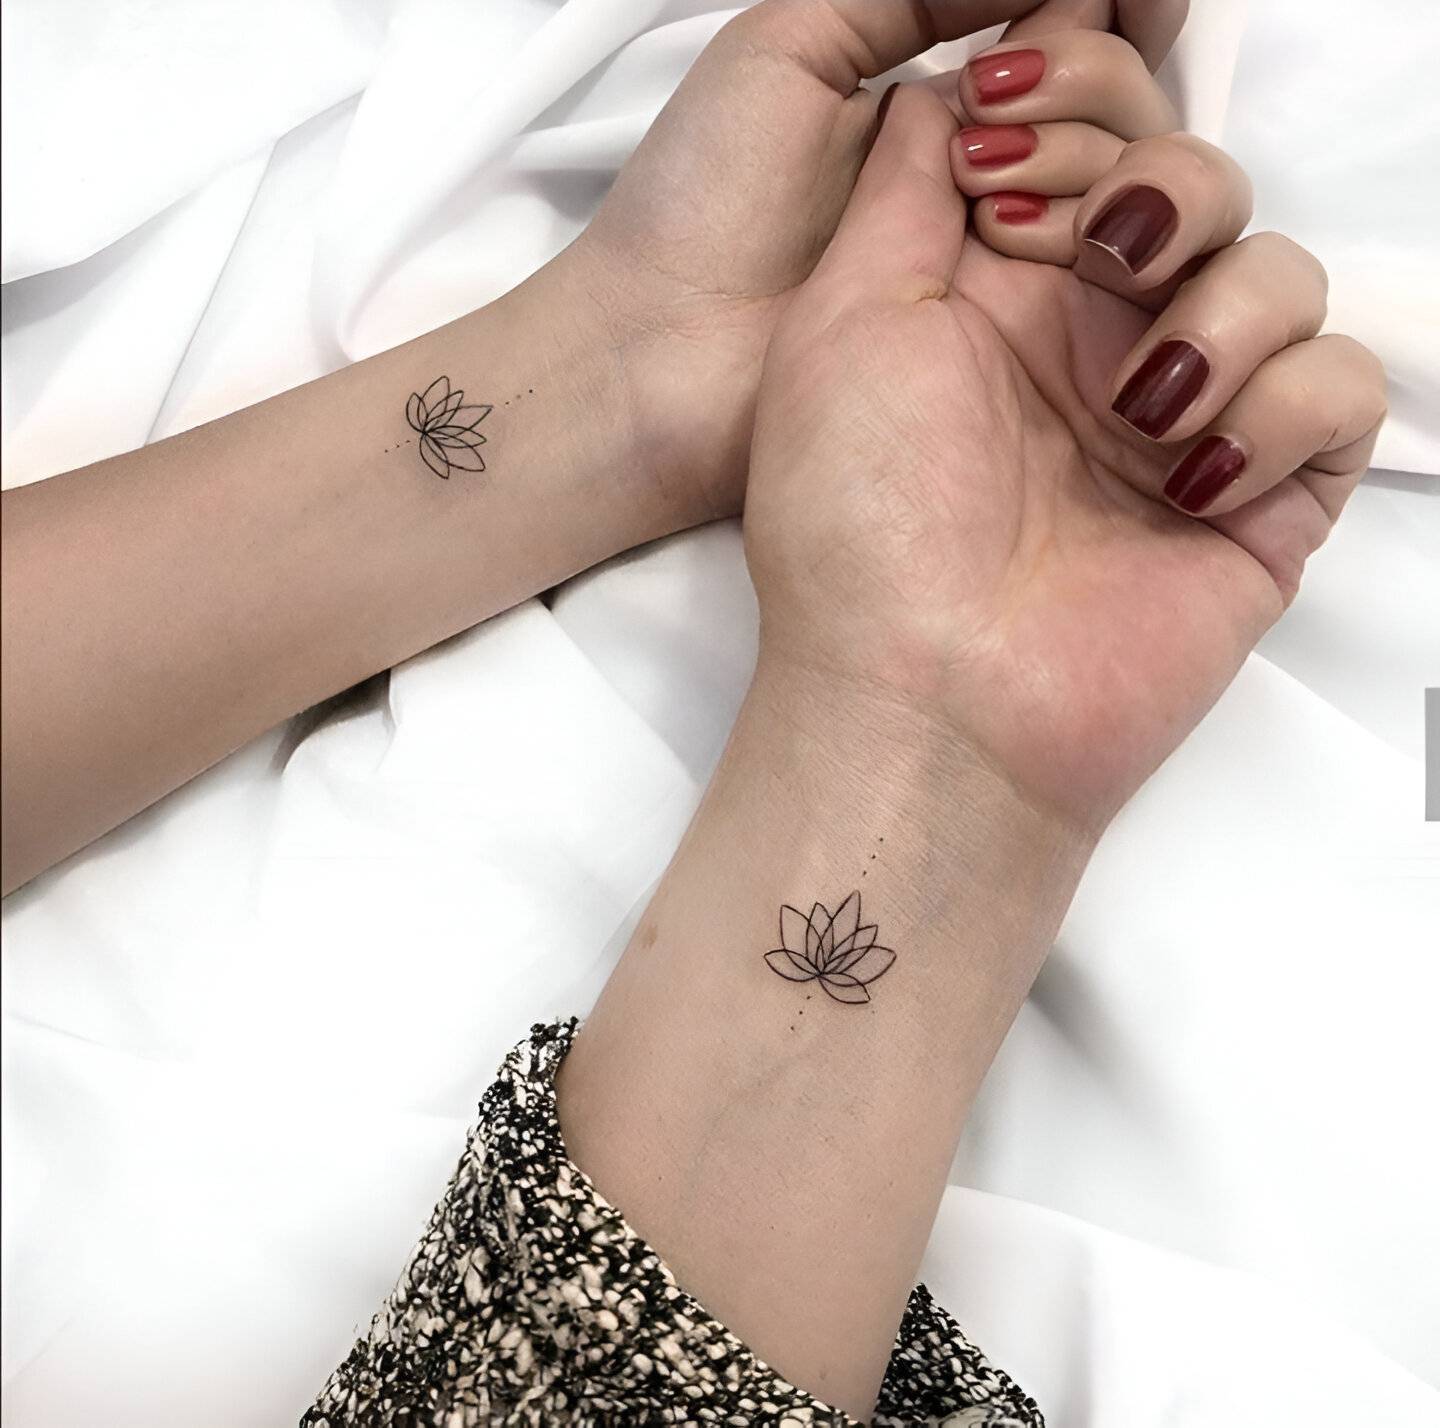 27 Feminine Best Friend Tattoos With The Perfect Elegant Touch 26